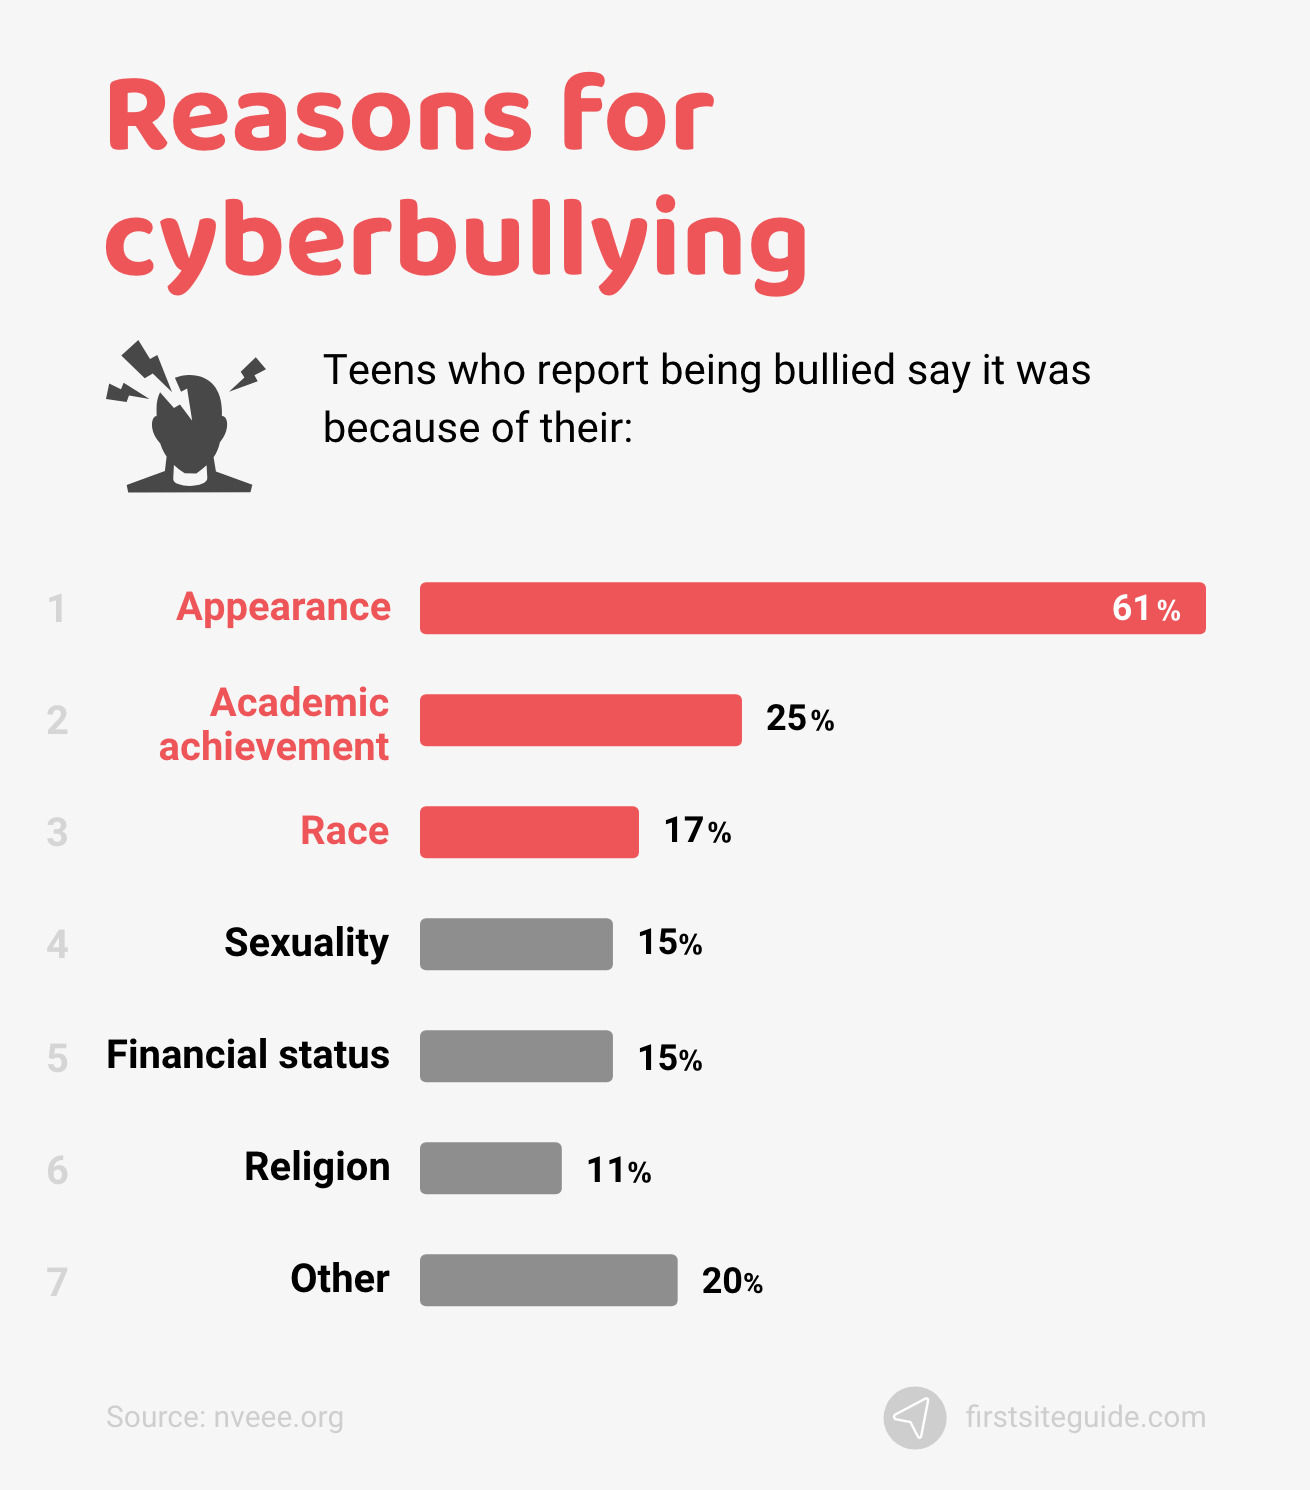 Reasons for cyberbullying